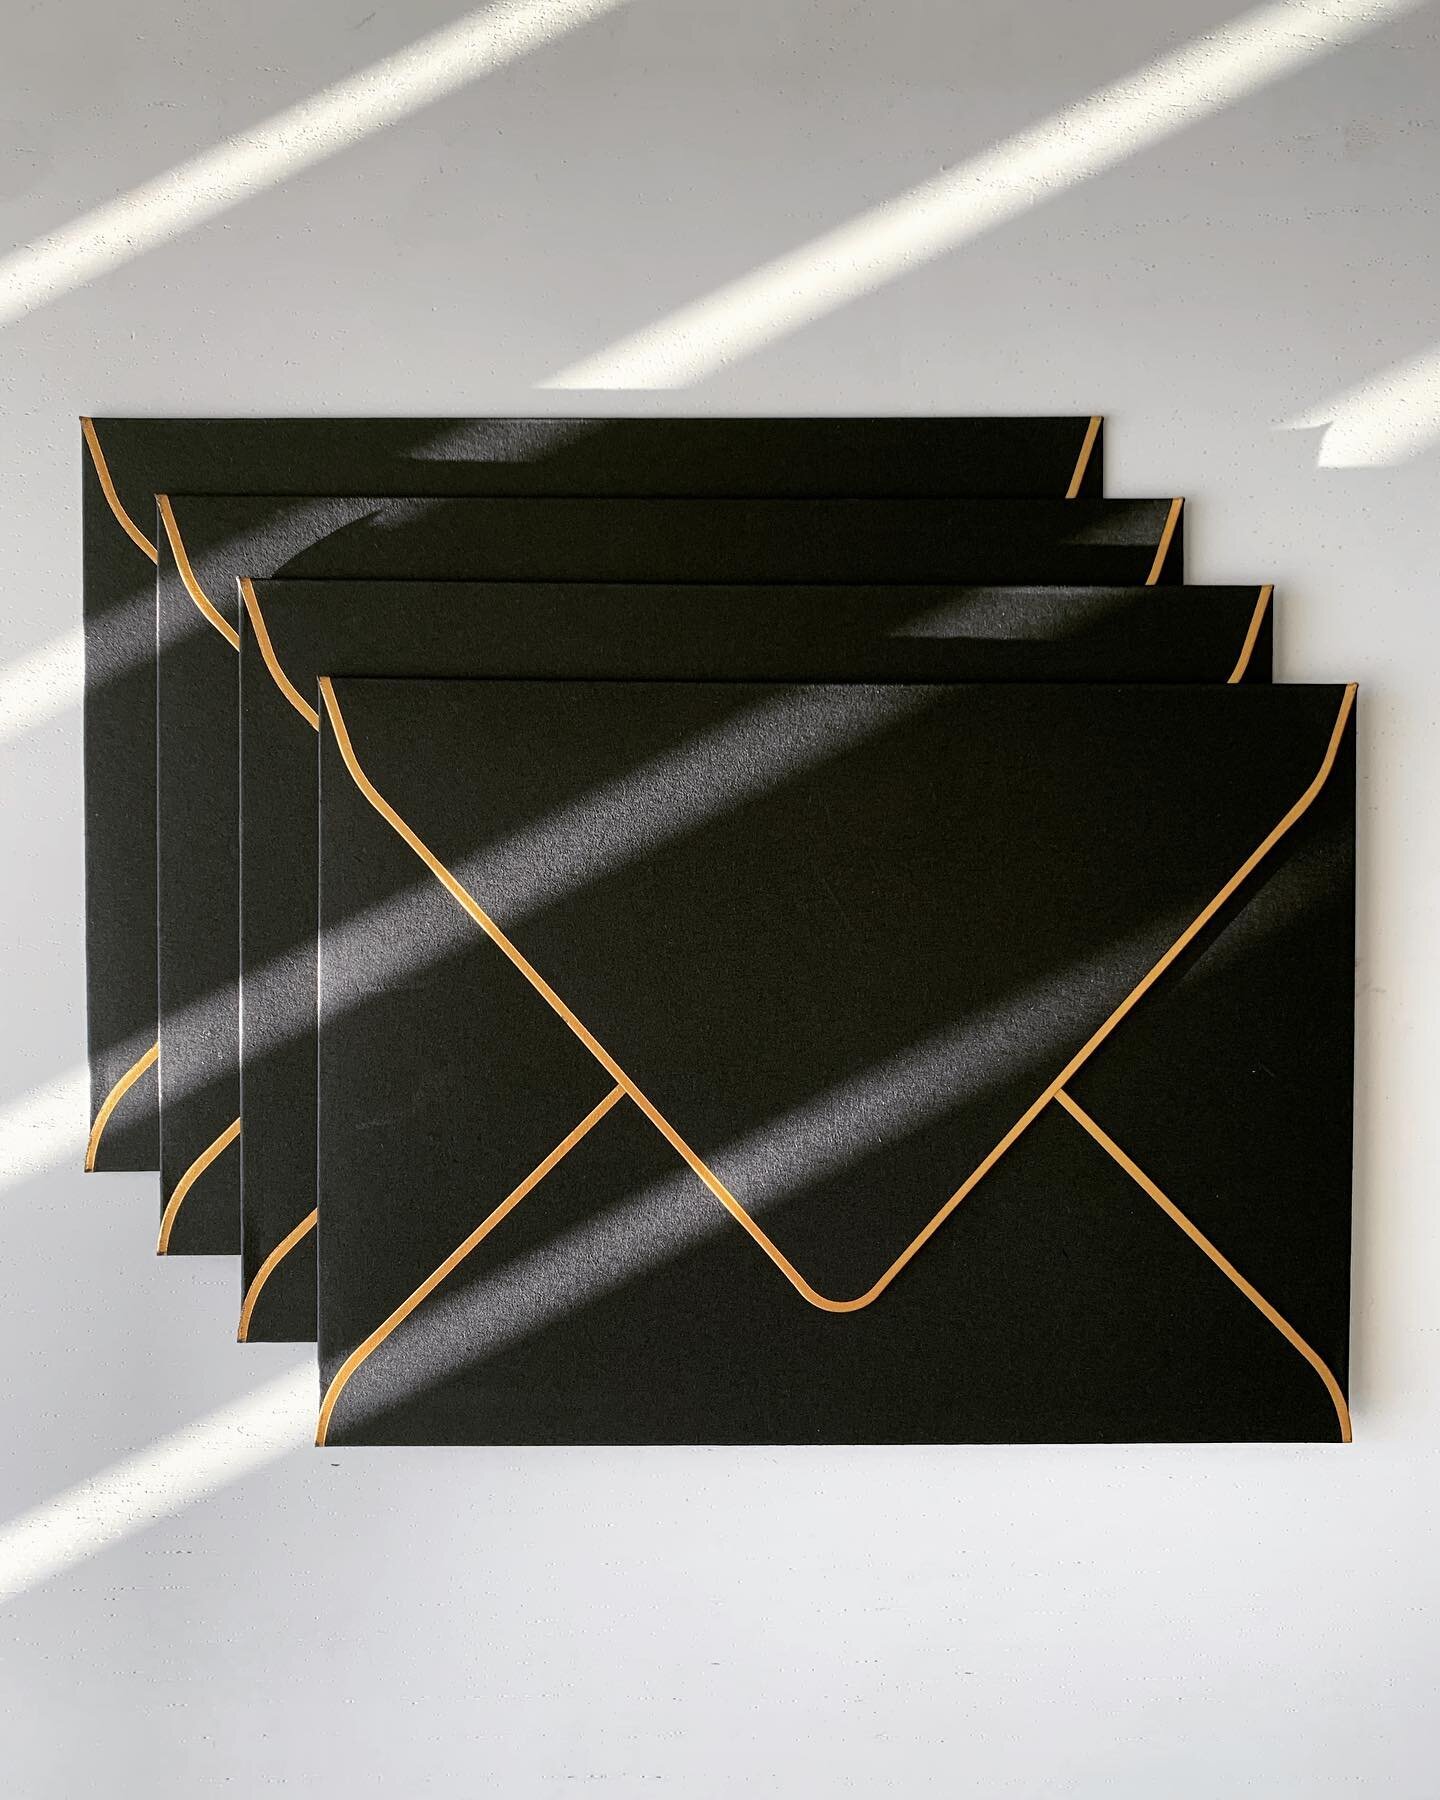 Fresh House of DNM stationary and accessories ✨

Getting ready to send out a big announcement to 100 of our top clients, team, and house friends. If you&rsquo;d like an announcement, DM us your mailing address 💌 

&mdash;

Notecards printed by @moo 